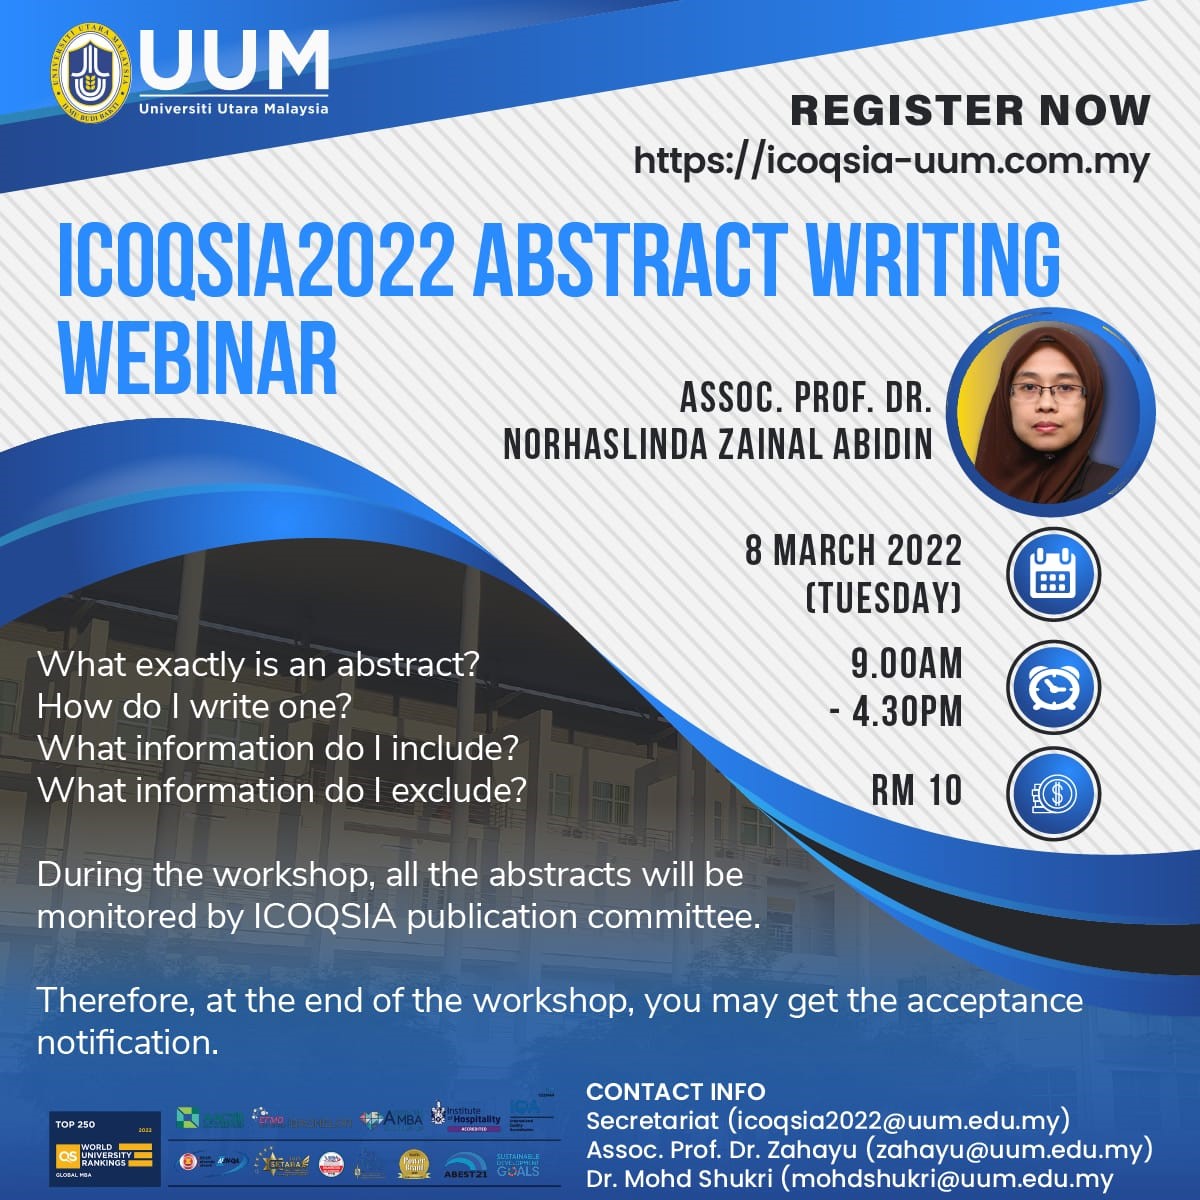 "ICOQSIA 2022 Abstract Writing”